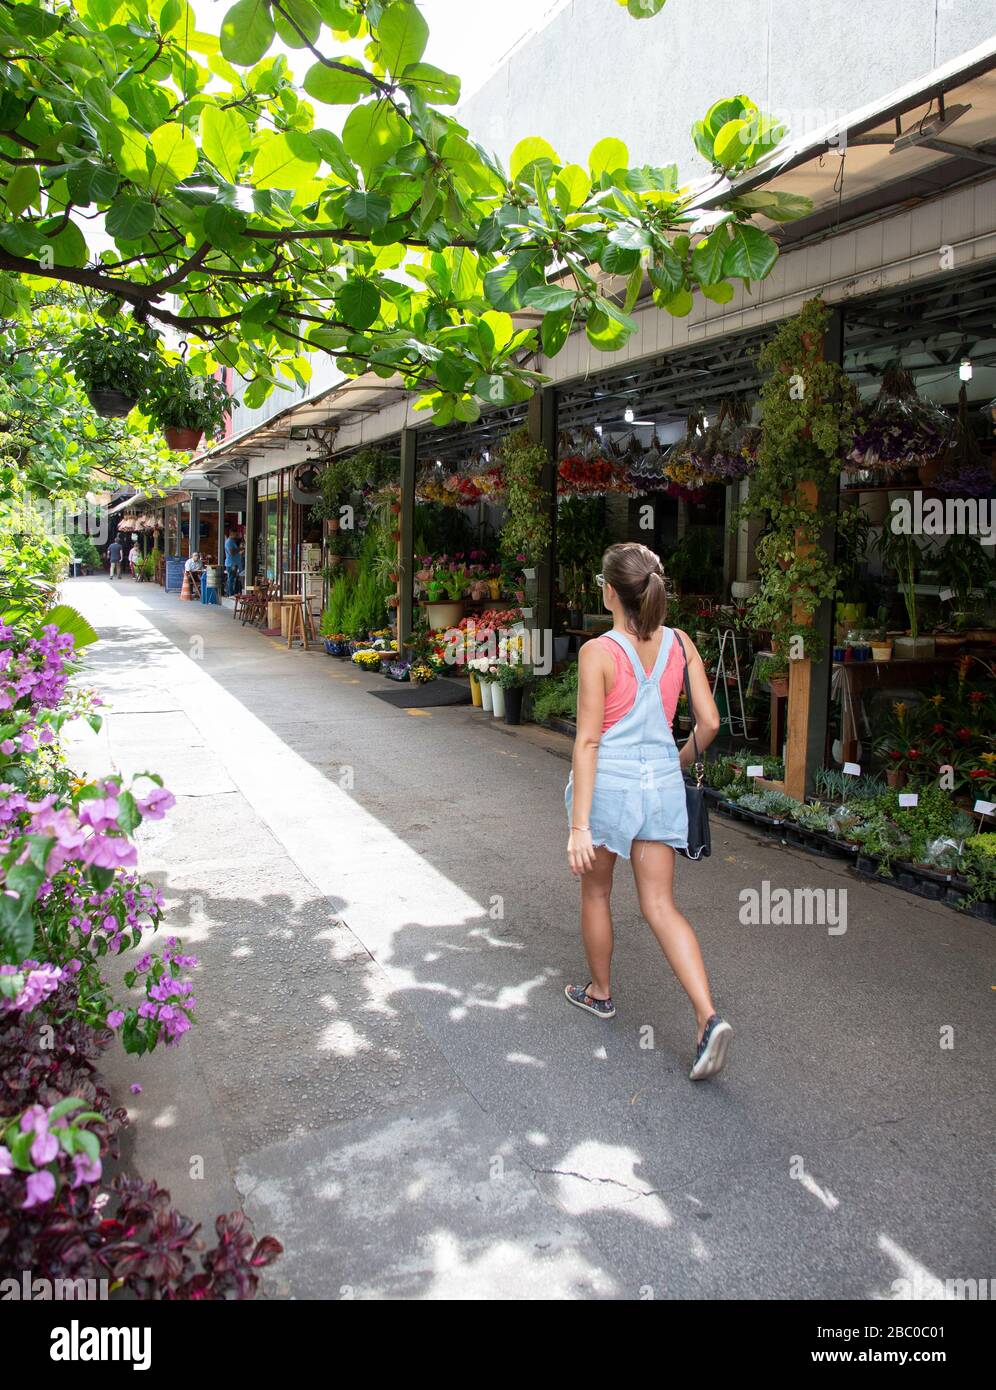 A girl walks through a Market place full of plant and flower stalls Stock Photo